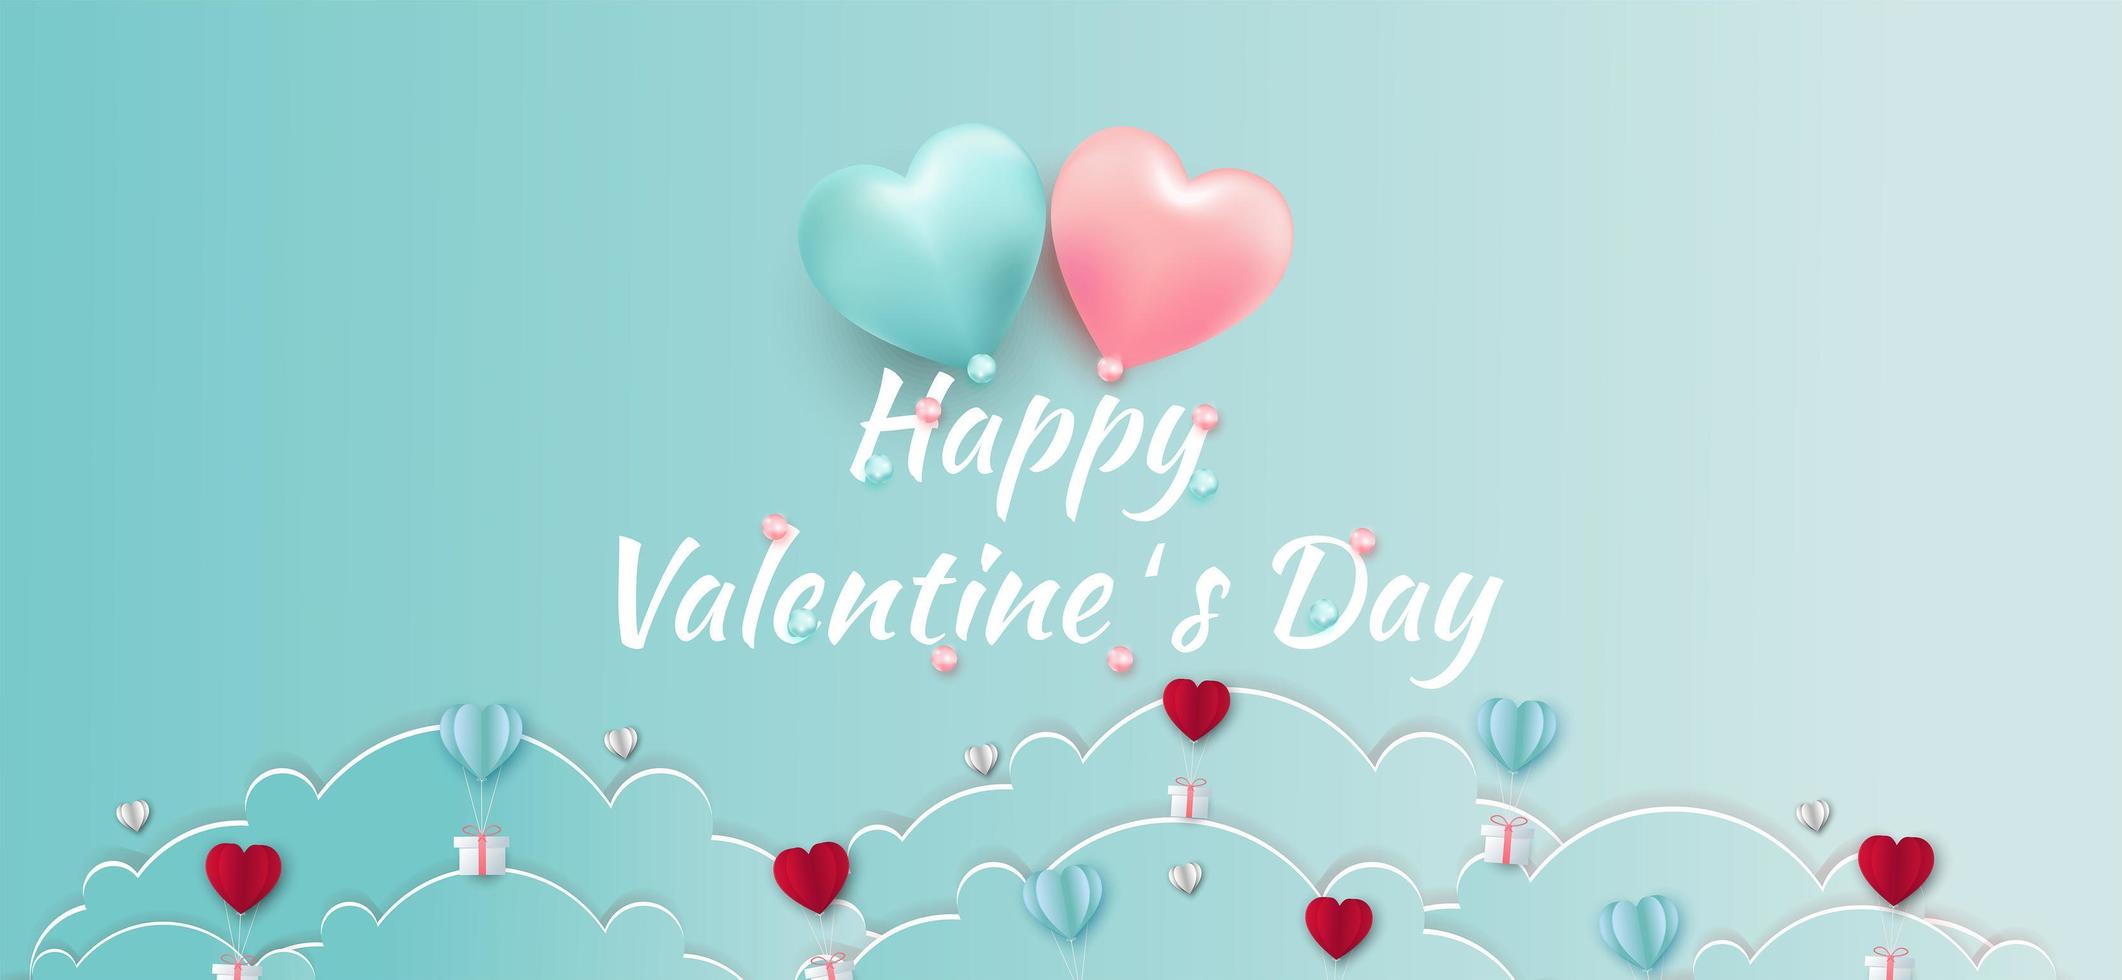 Valentine's Day sale background.Romantic composition with hearts . Vector illustration for website , posters,ads, coupons, promotional material.